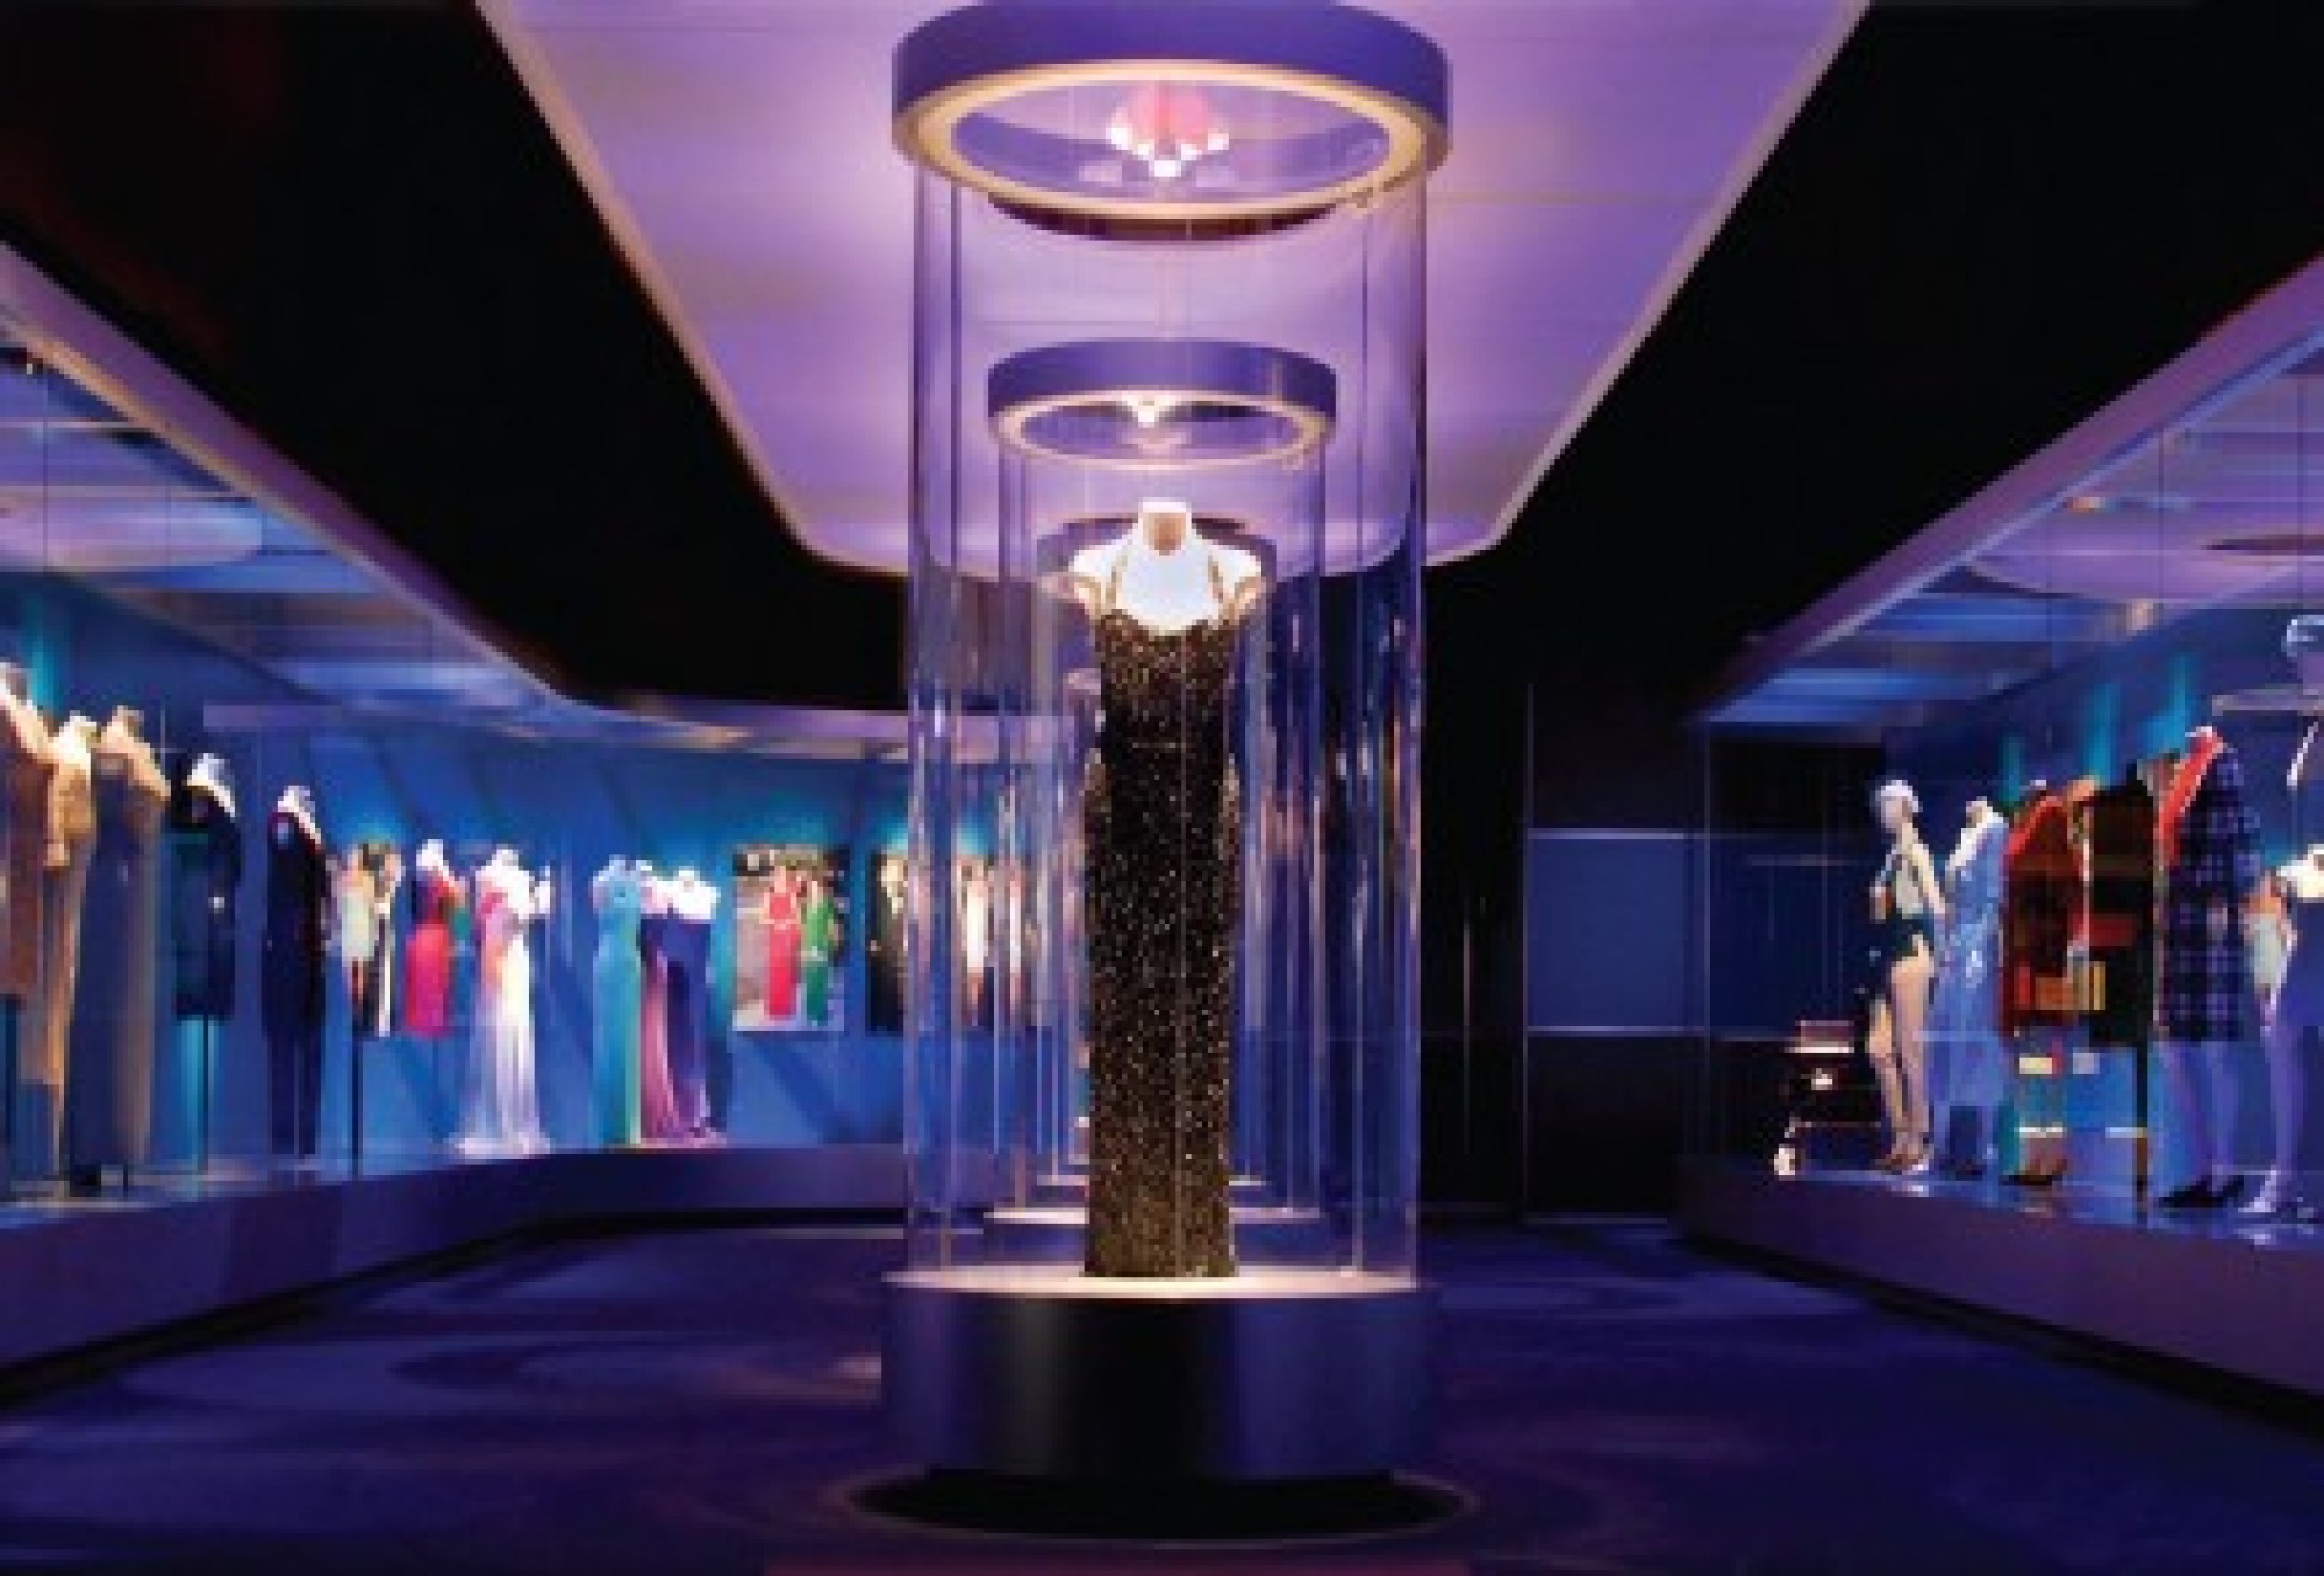 Nine Mall of America Galleries Chronicles the Life of Princess Diana